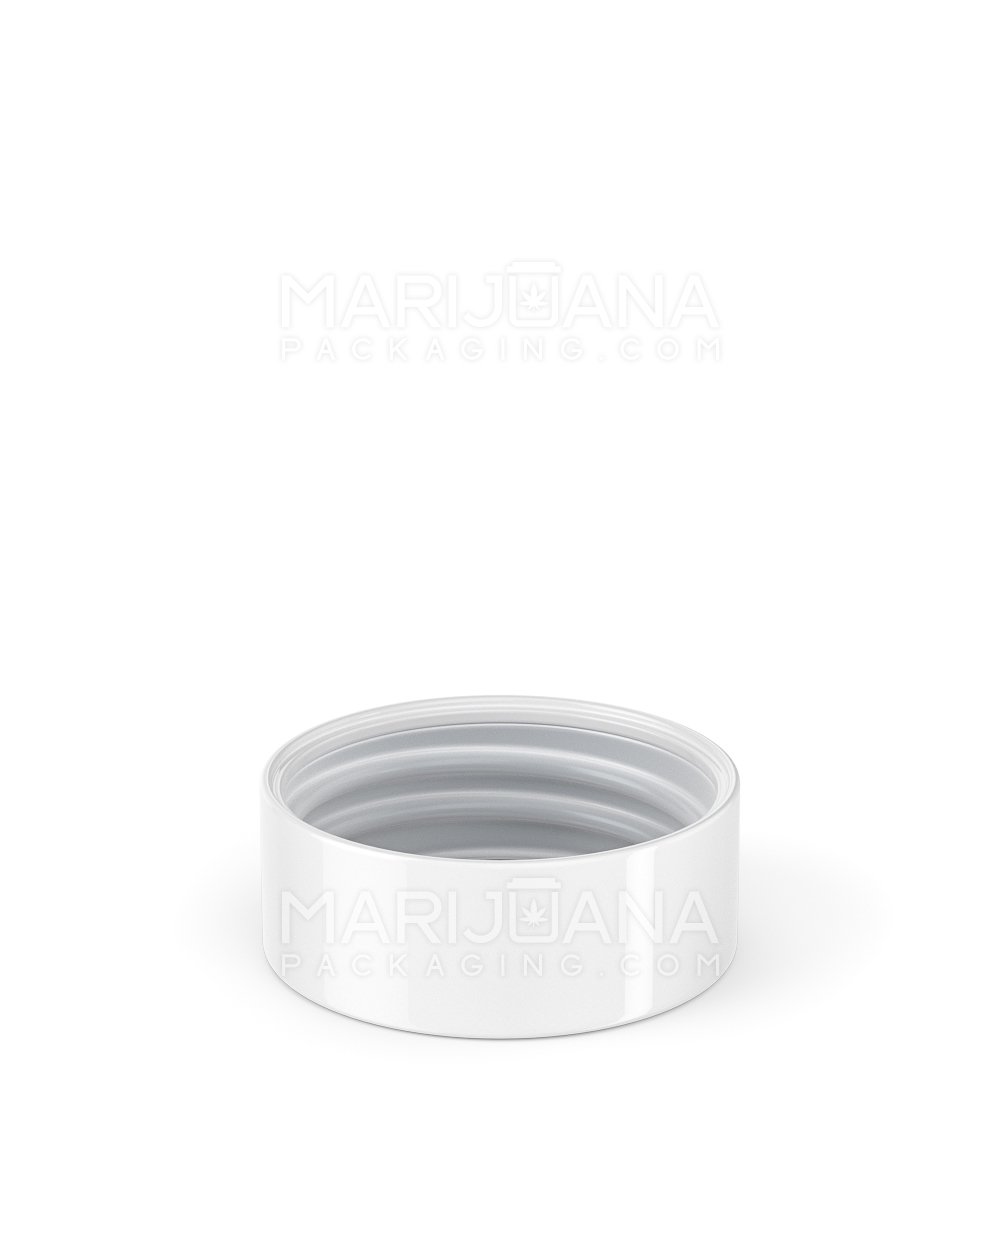 Child Resistant | Smooth Push Down & Turn Plastic Caps w/ Foil Liner | 38mm - Glossy White - 320 Count - 4